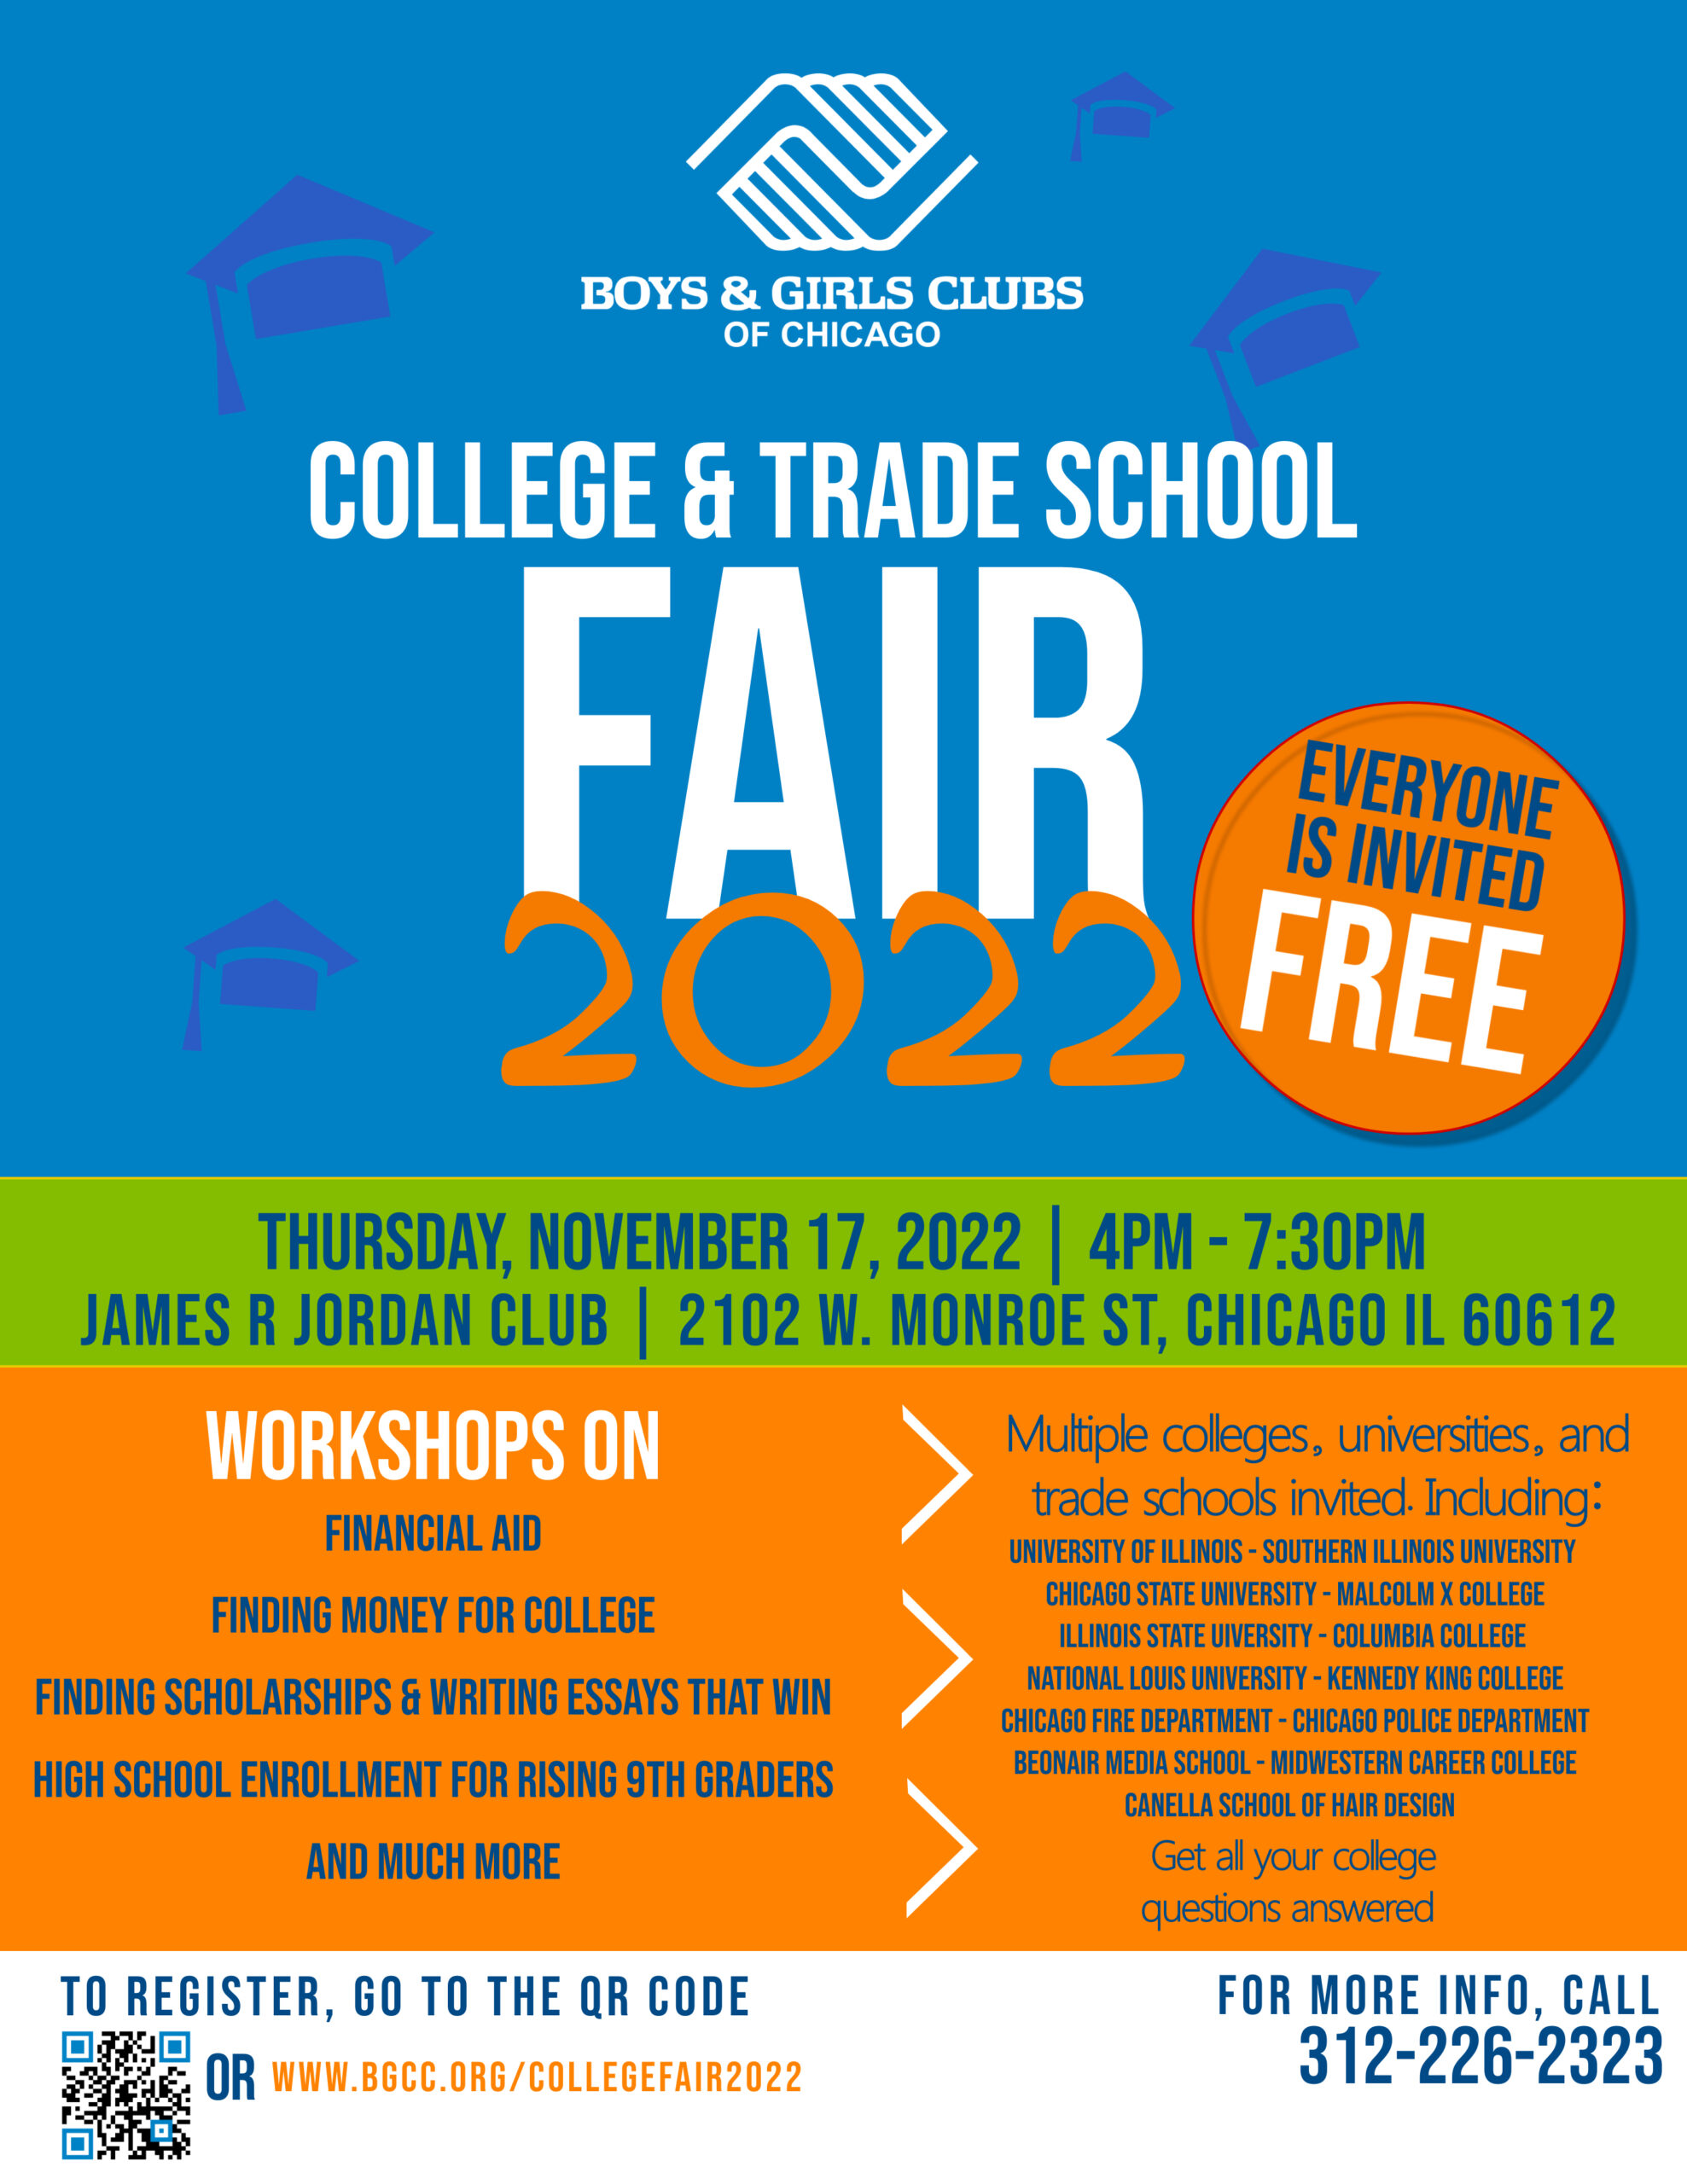 A flyer for the college & trade school fair 2022 including workshops listing.